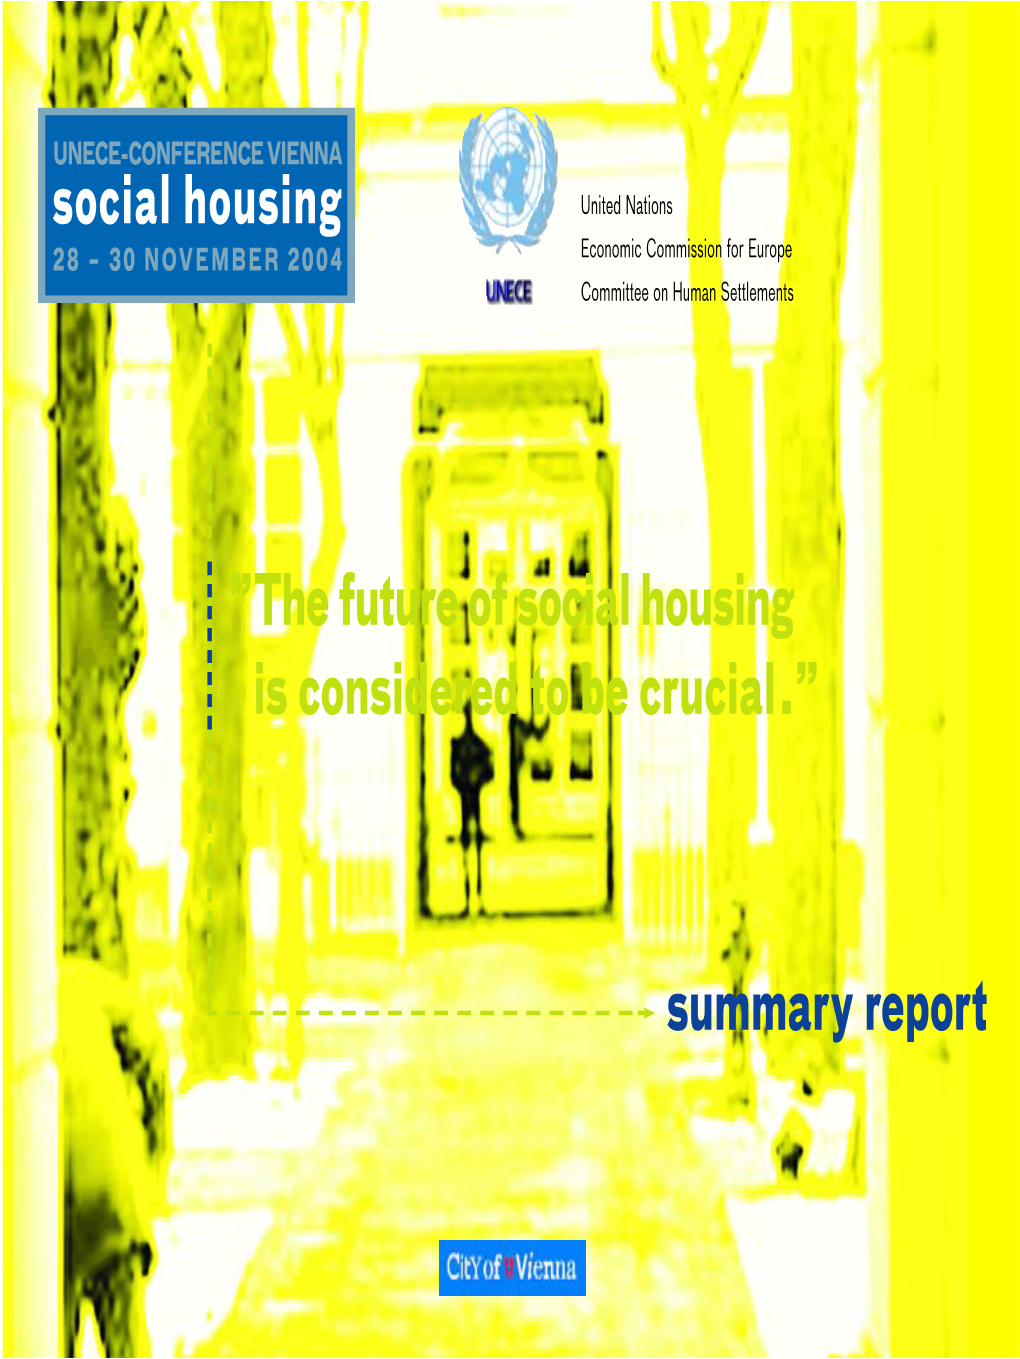 The Future of Social Housing Is Considered to Be Crucial.” Summary Report